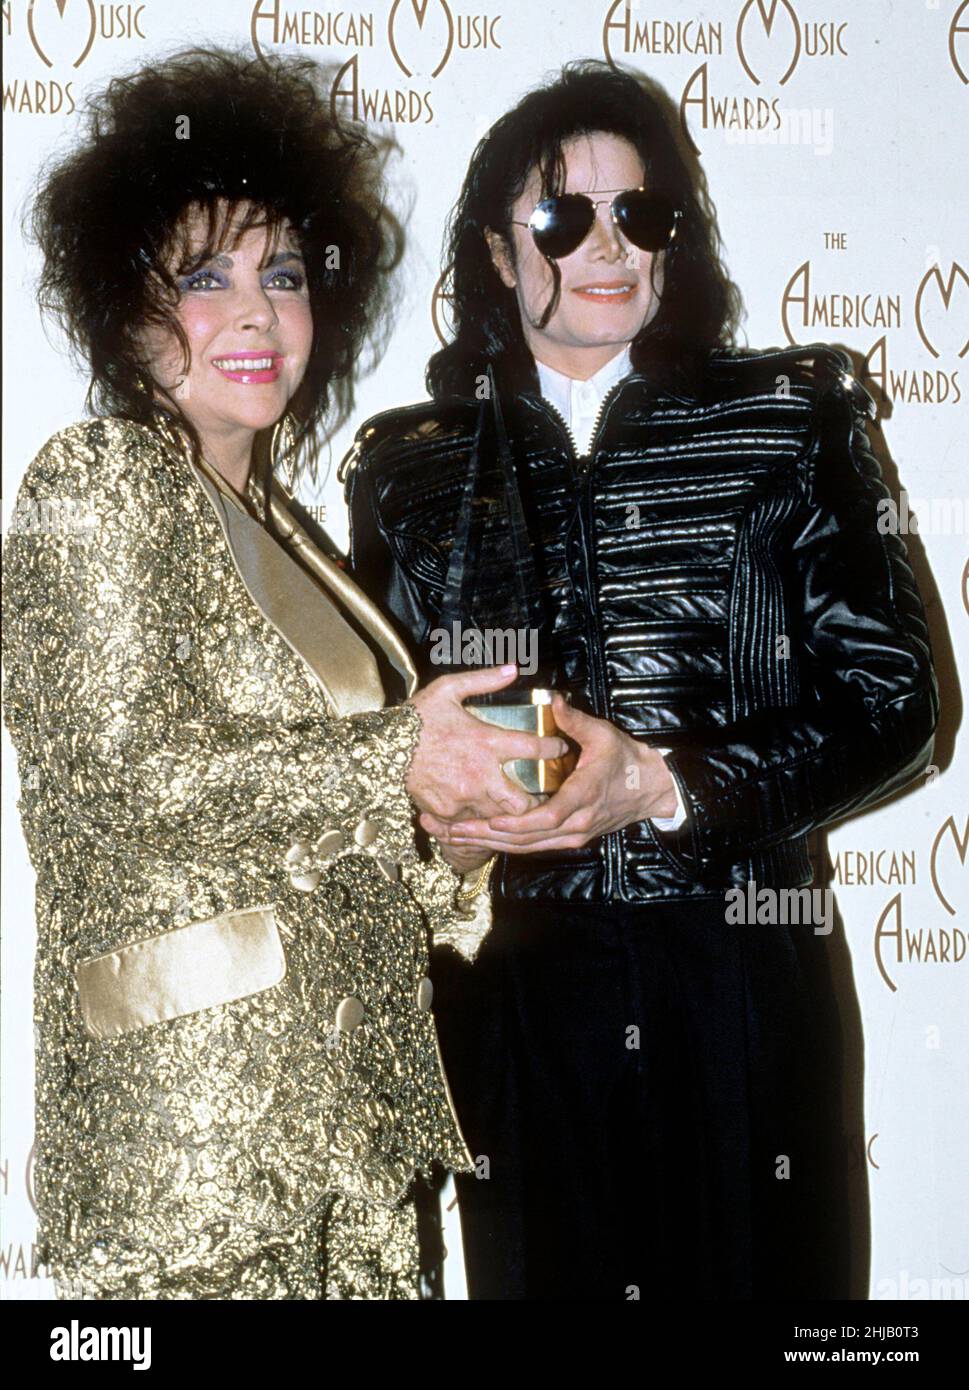 Michael Jackson 1993 American Music Awards with Elizabeth Taylor Credit: Ron Wolfson / Rock Negatives / MediaPunch Stock Photo